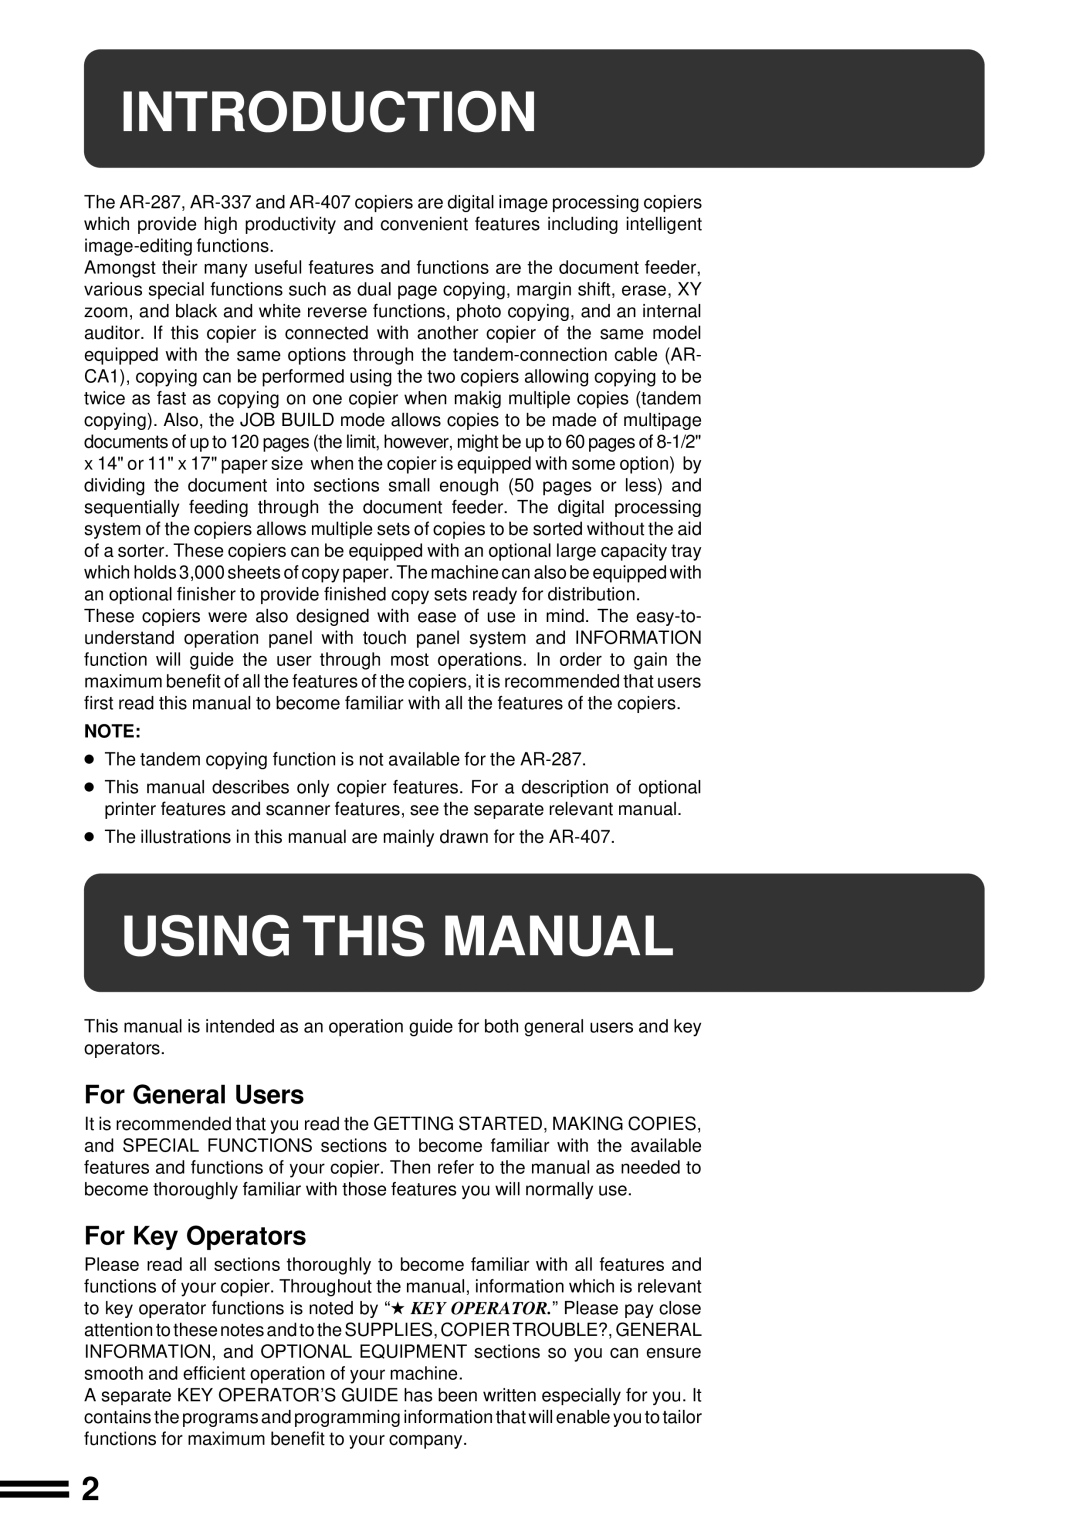 Sharp AR-287 manual Introduction, Using This Manual, For General Users, For Key Operators 